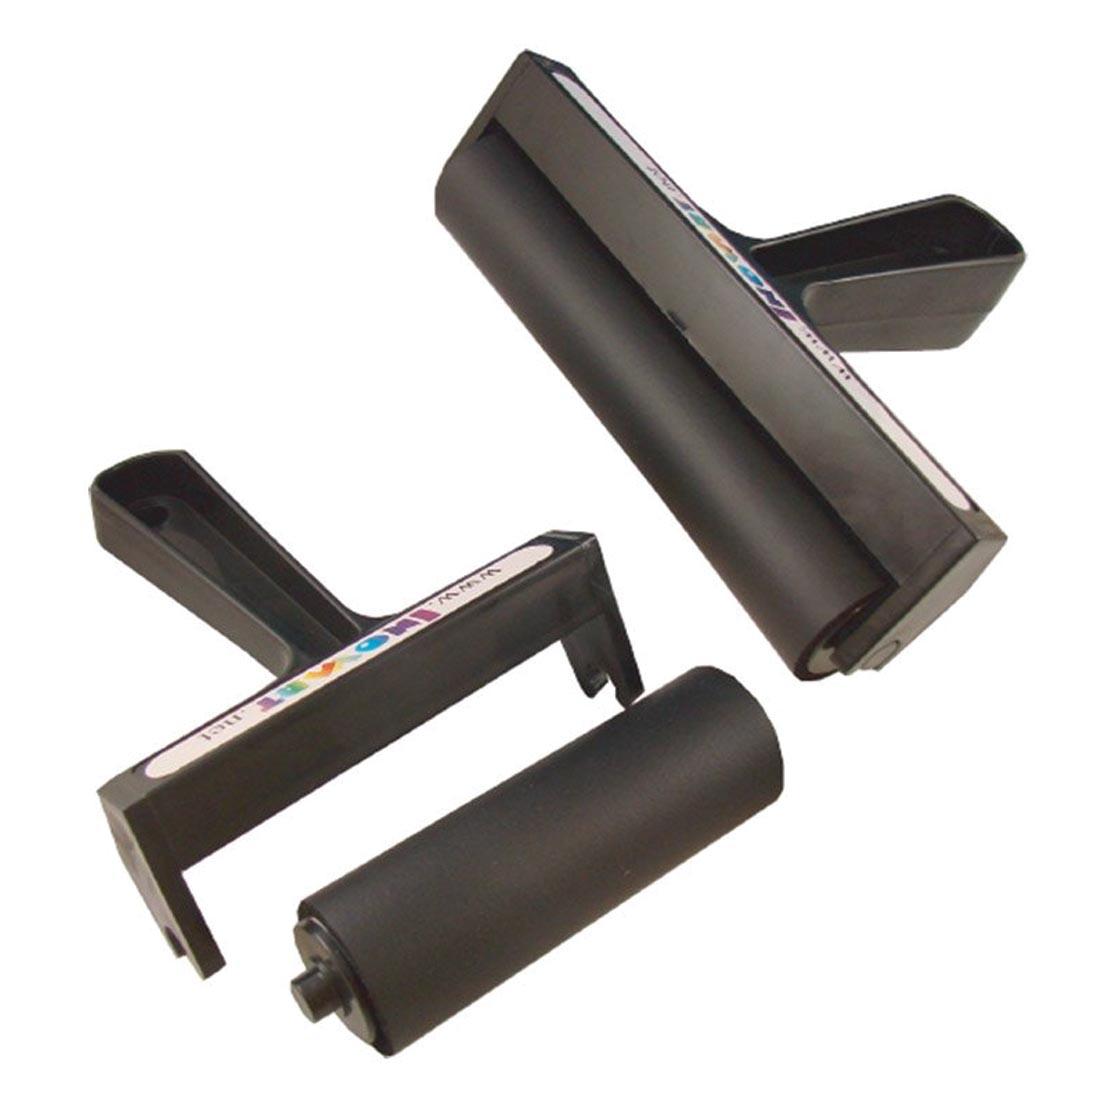 Inovart Soft Rubber Brayer shown both assembled and with roller snapped out of handle